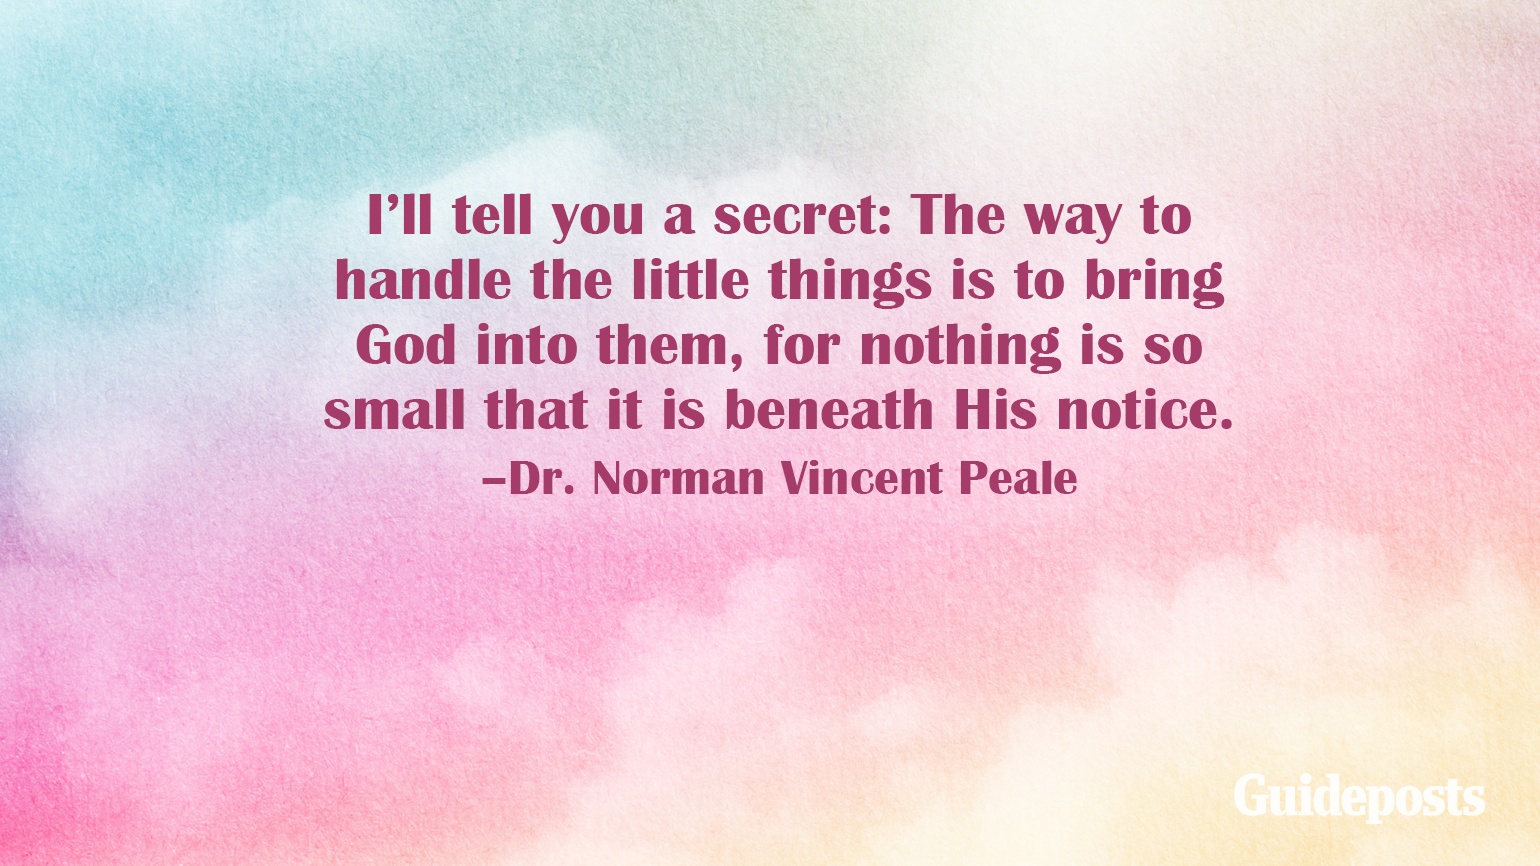 I’ll tell you a secret: The way to handle the little things is to bring God into them, for nothing is so small that it is beneath His notice. –Dr. Norman Vincent Peale